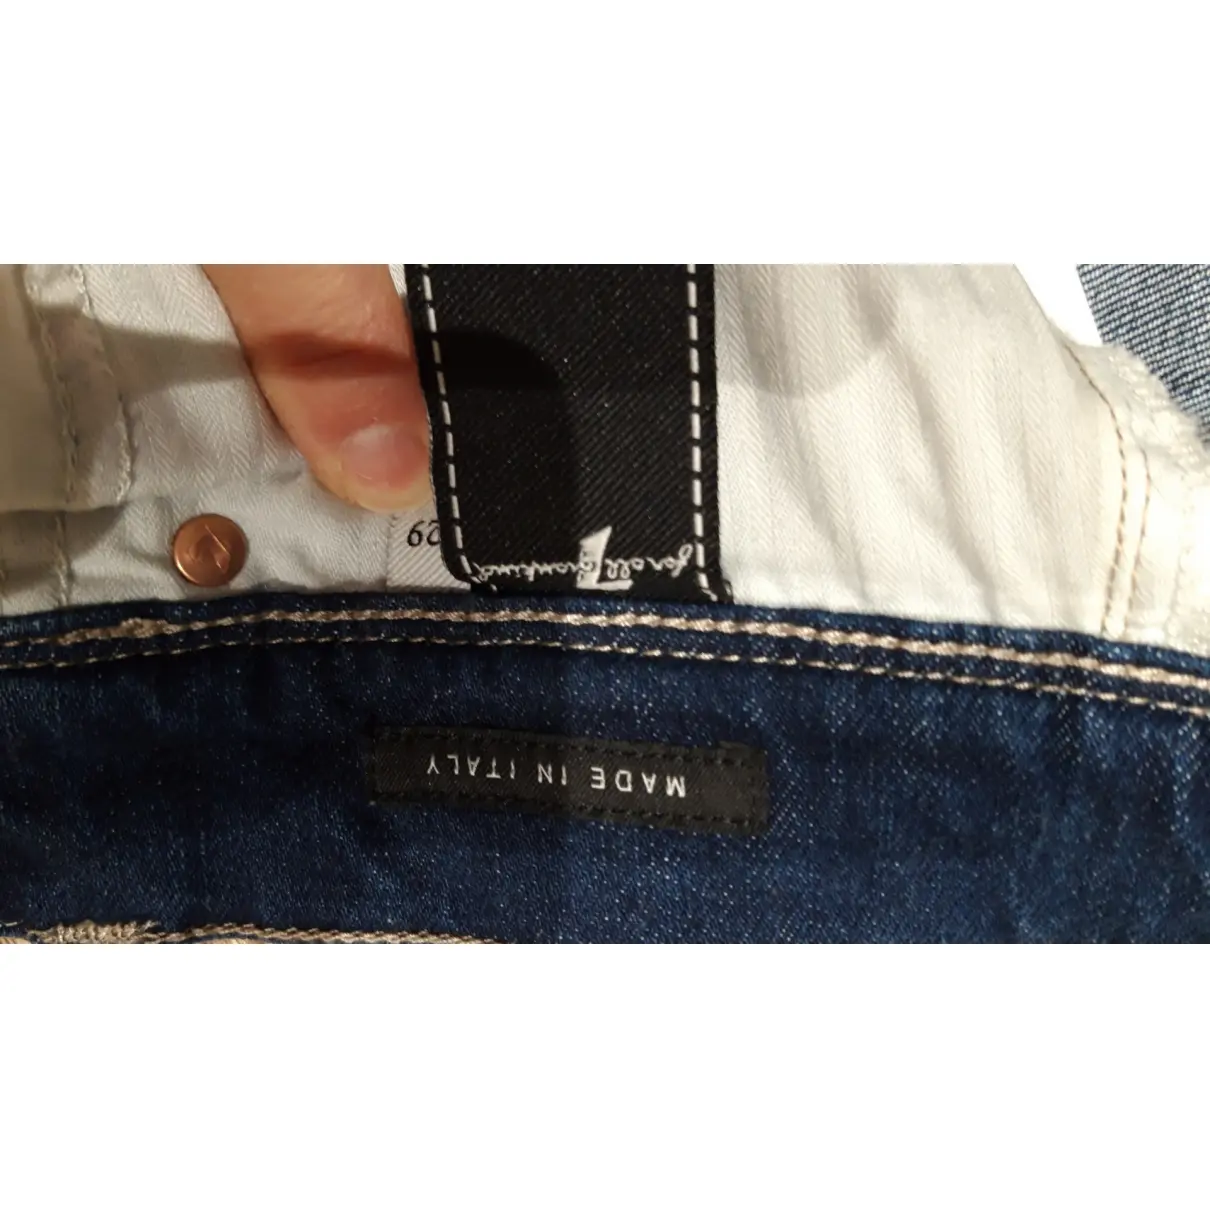 Luxury 7 For All Mankind Jeans Men